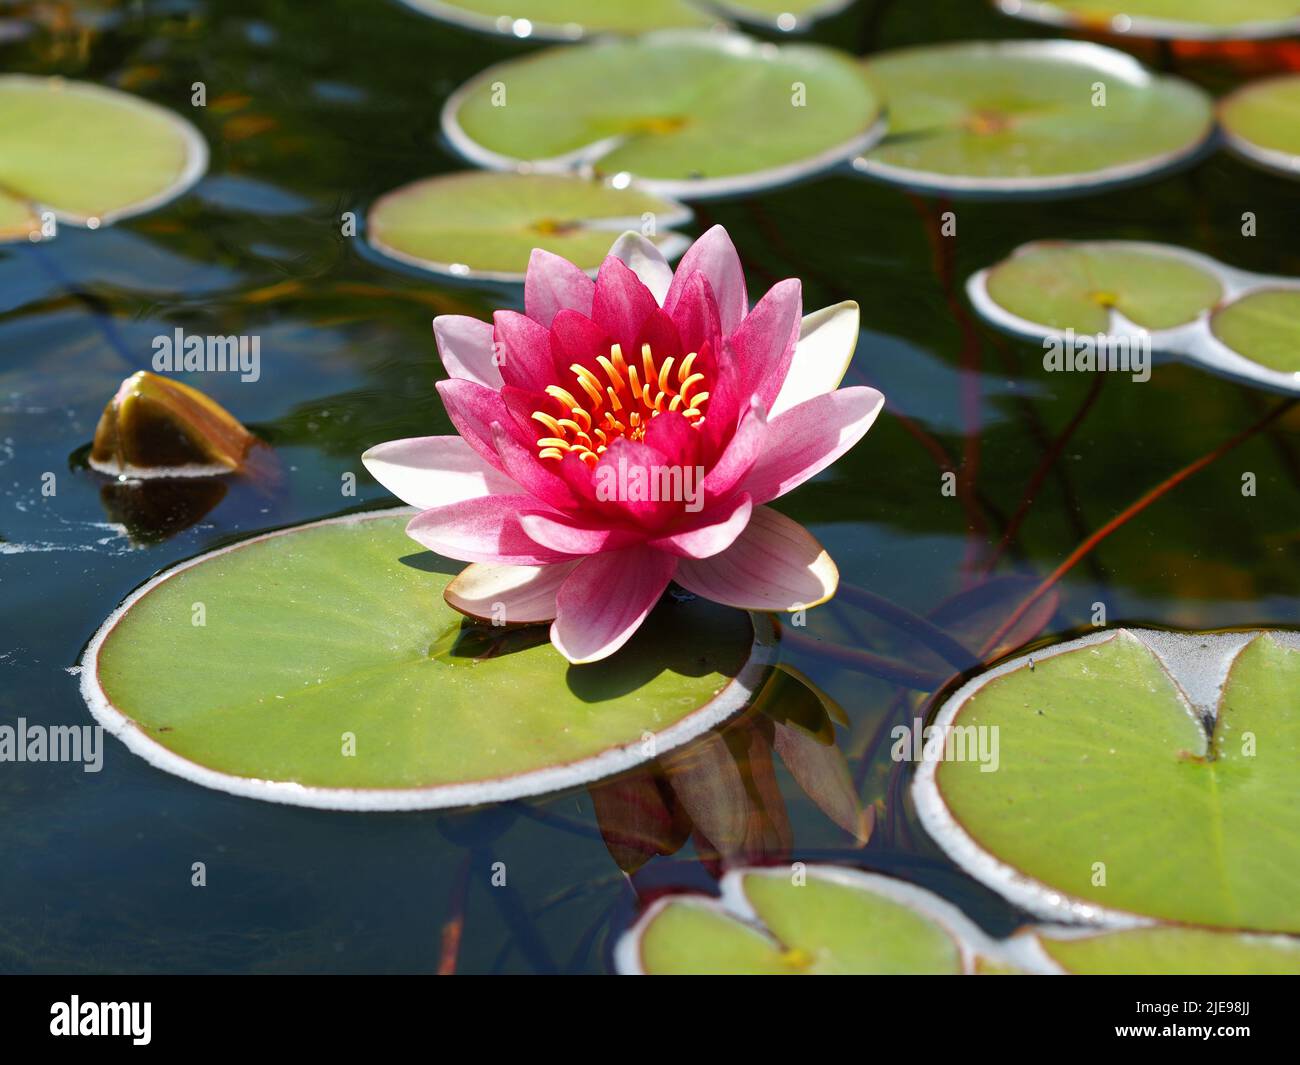 Beautiful pink and red flower of a waterlily (Nymphaea candida) in a garden pond in Ottawa, Ontario, Canada. Stock Photo